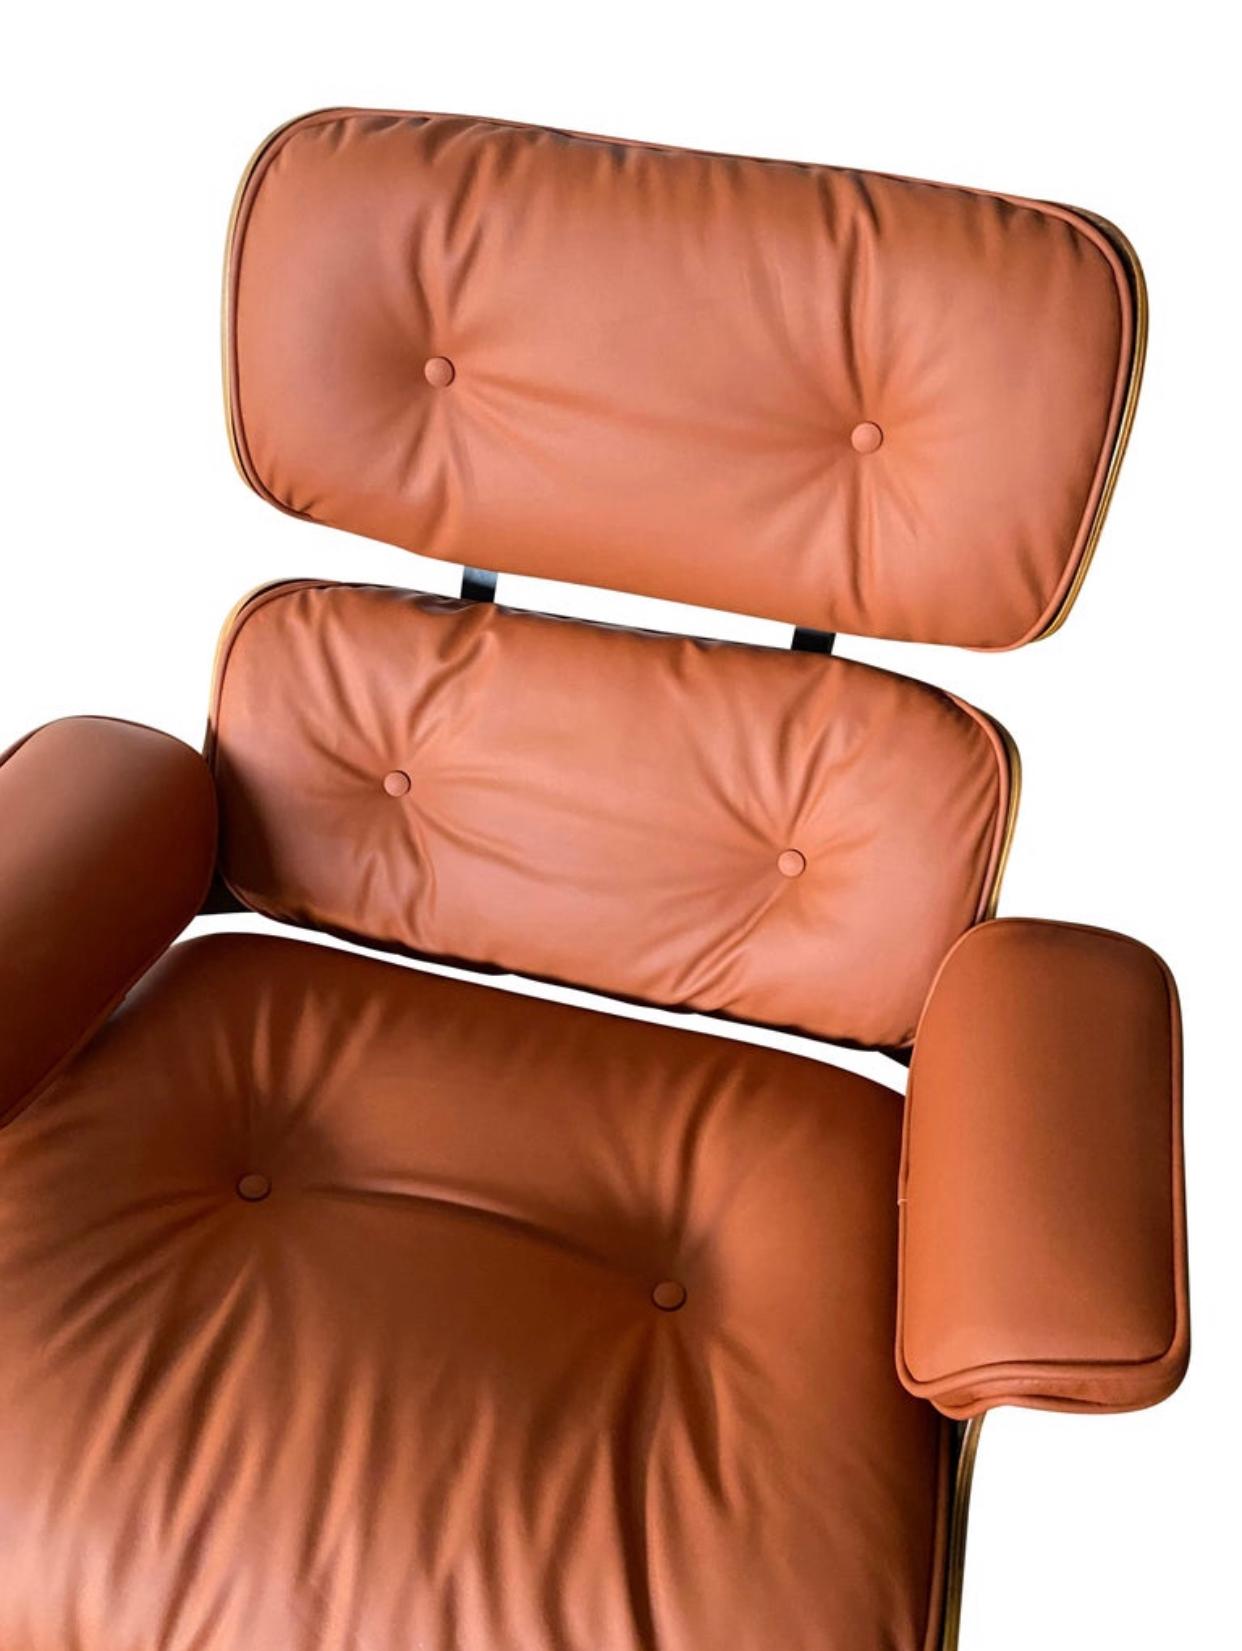 Beautiful custom edition of the iconic Eames lounge chair and ottoman. Rosewood shells and aluminum bases cradle the custom burnt orange leather cushions. New leather very soft and in excellent condition. This color is supremely rare. Chair signed